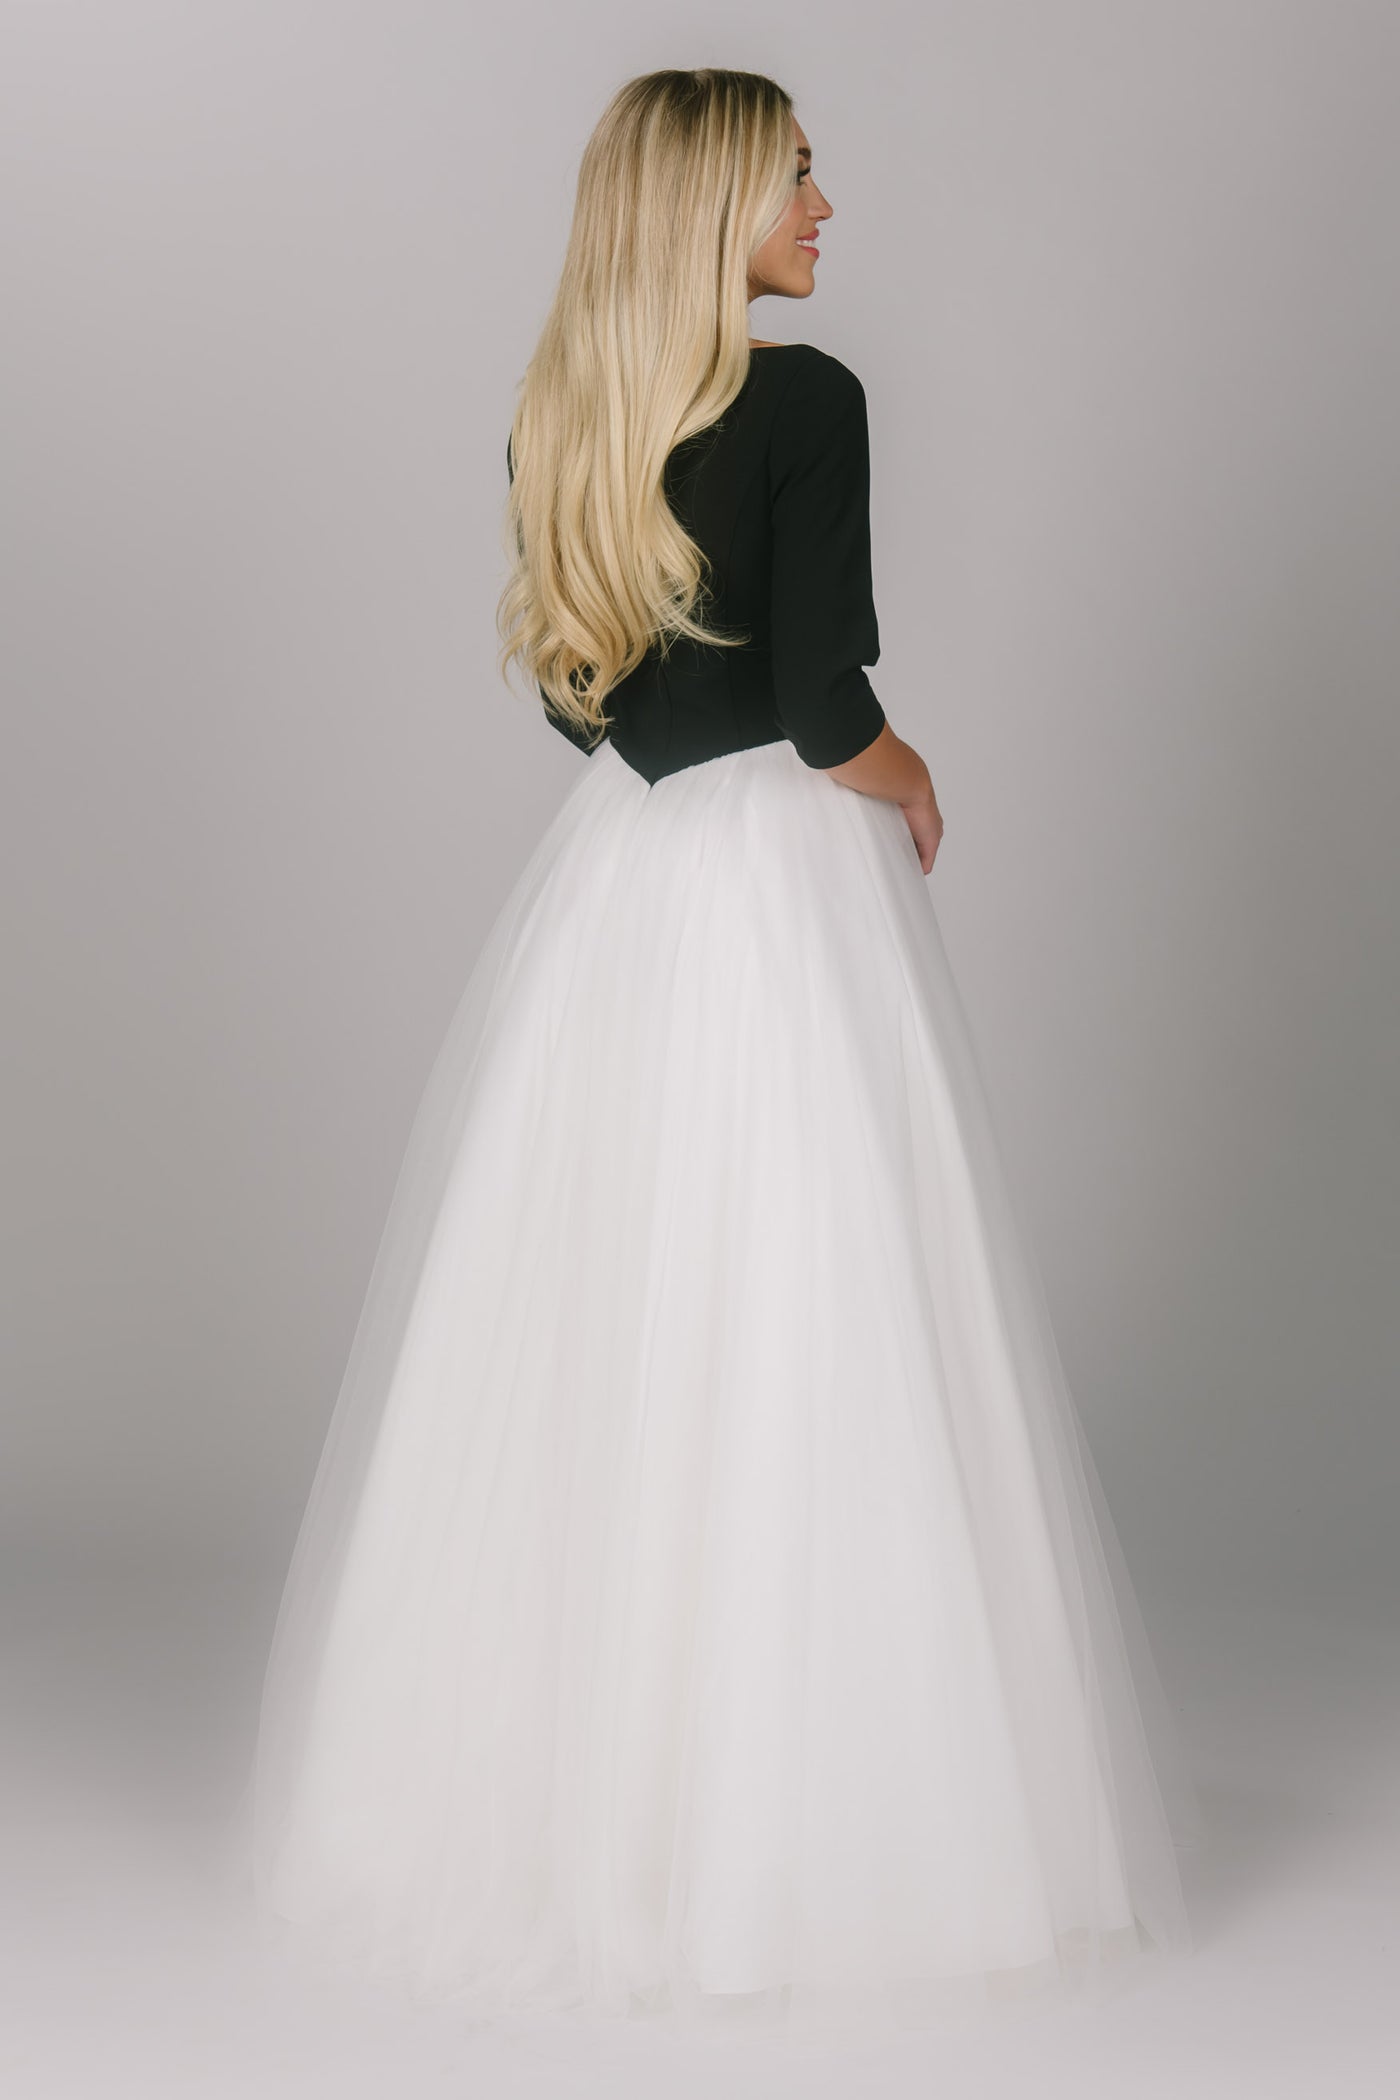 Modest prom ballgown with a white tulle skirt and black top. Sleeves are quarter length and it has a high scoop neckline. This is the perfect modest prom ballgown.